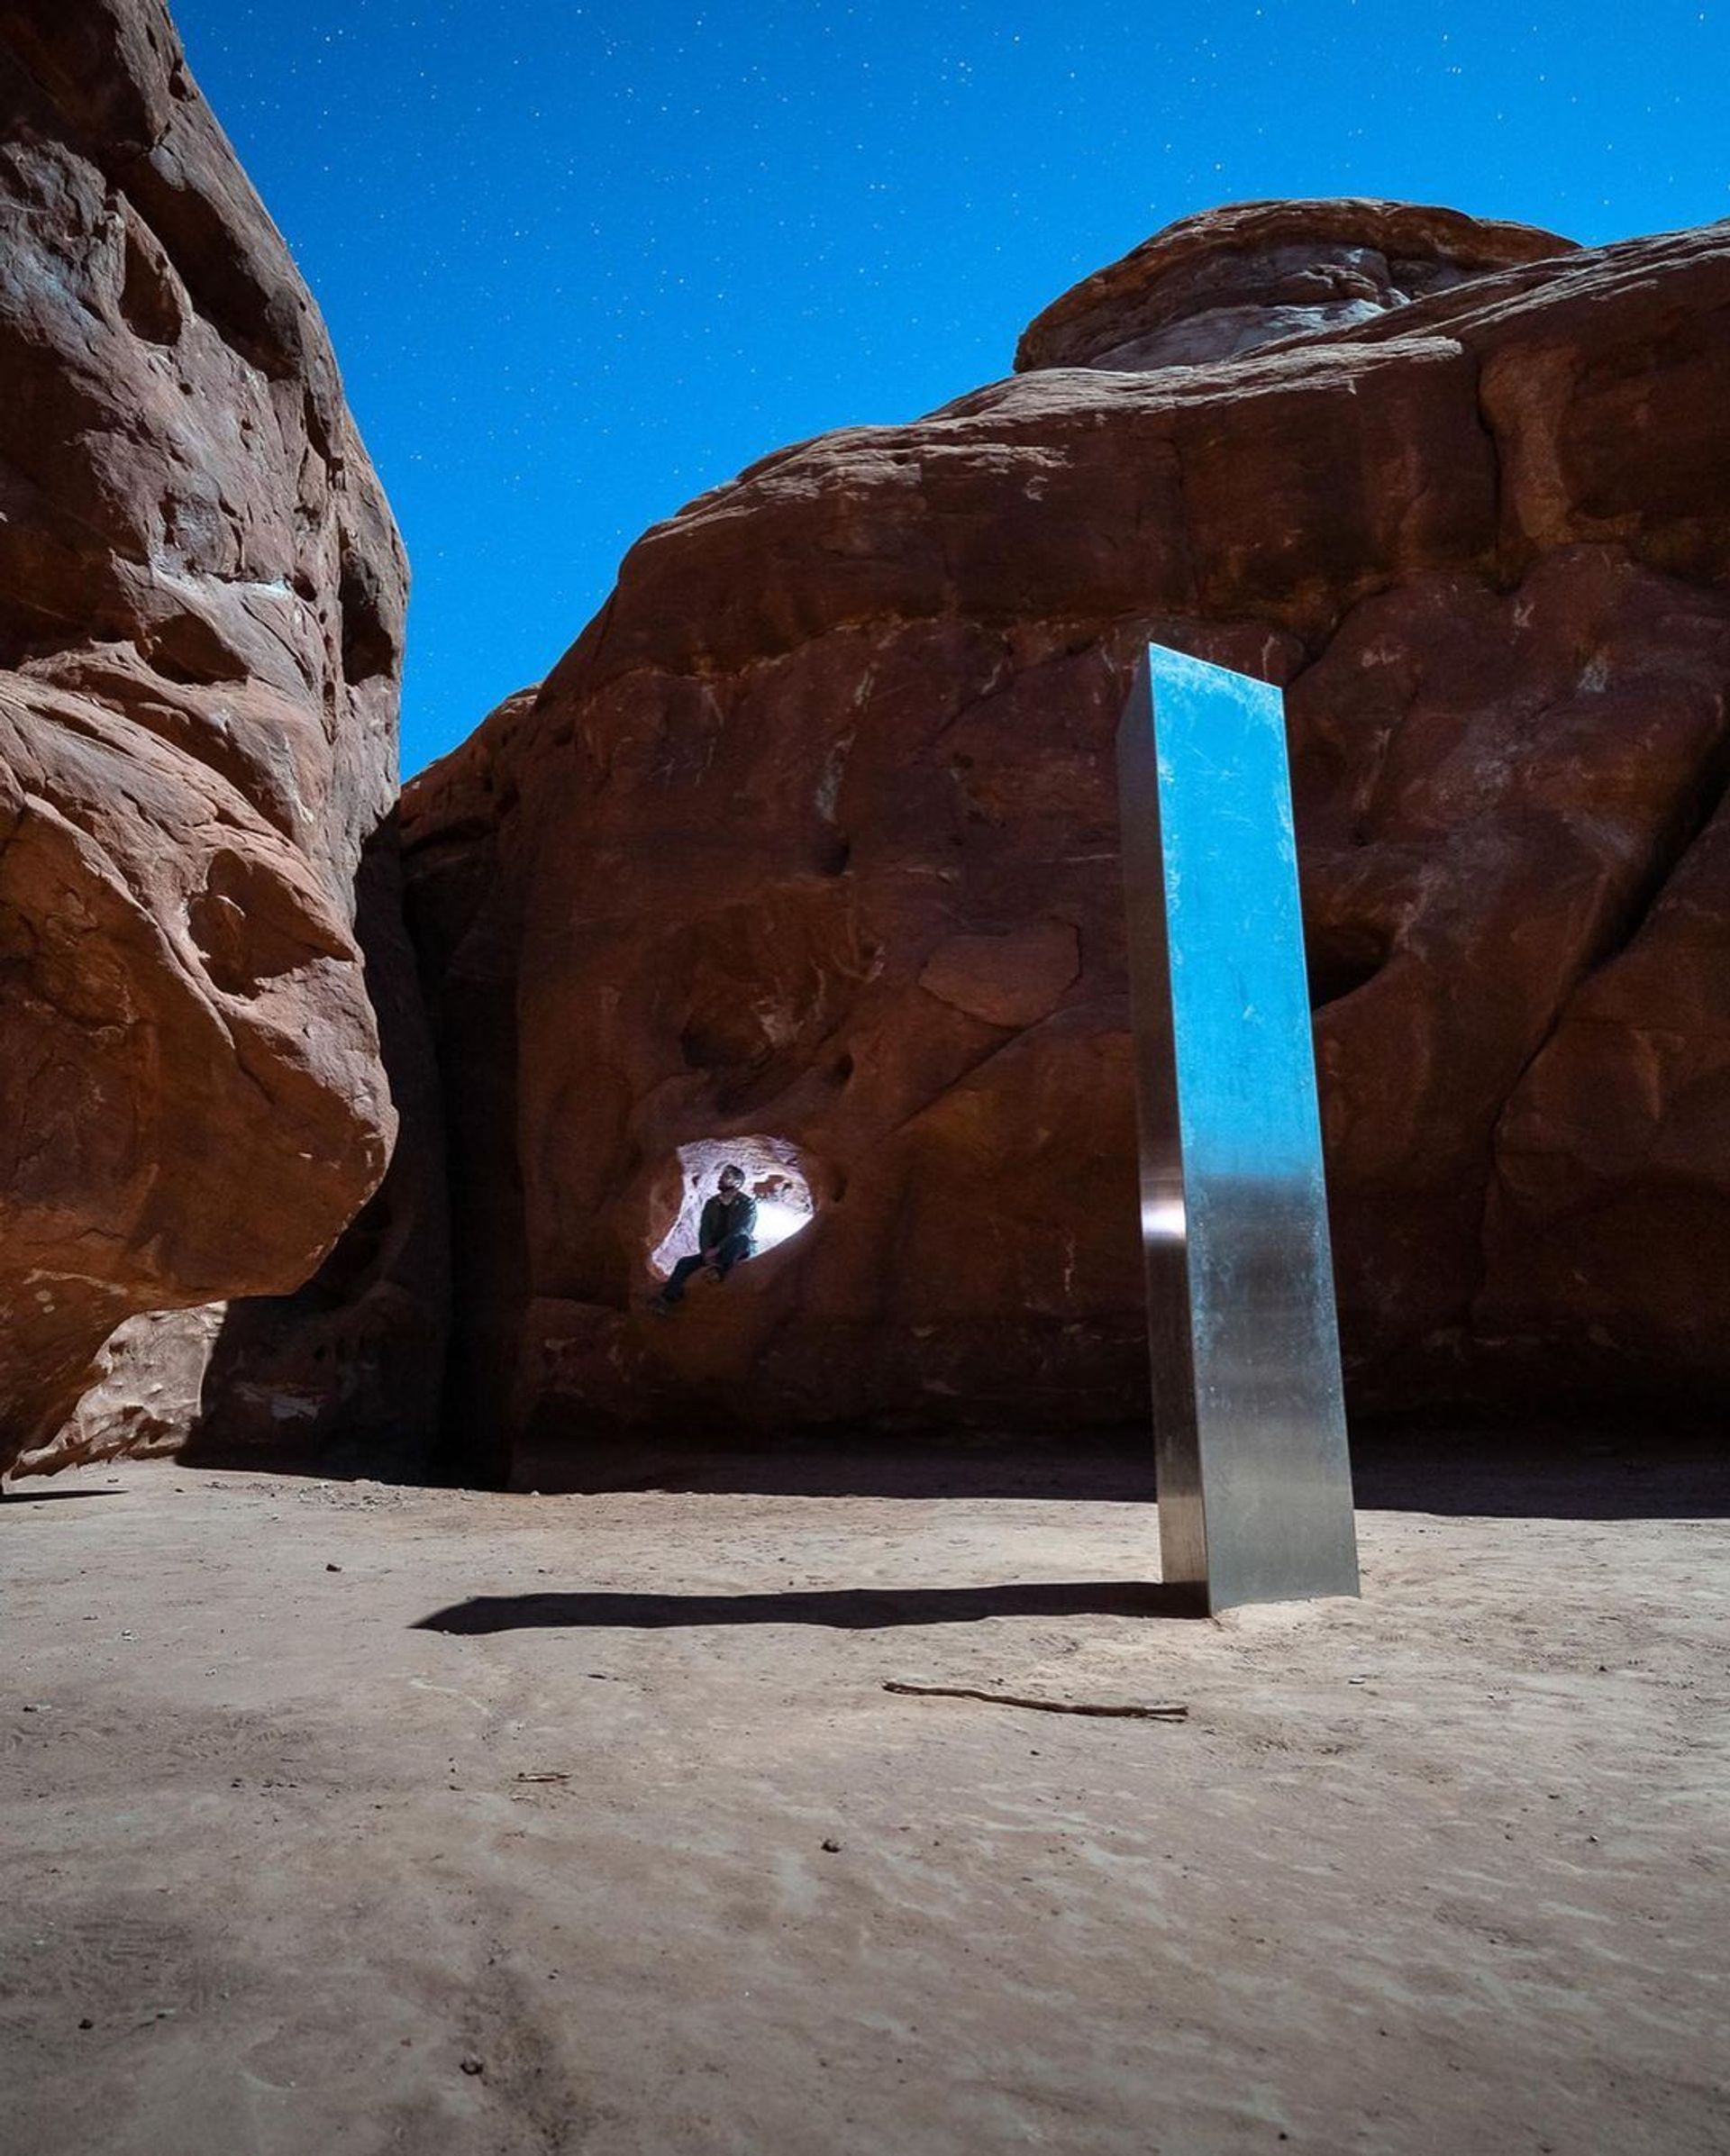 The mysterious Utah monolith brought hundreds of visitors to the remote desert area. Ross Bernards